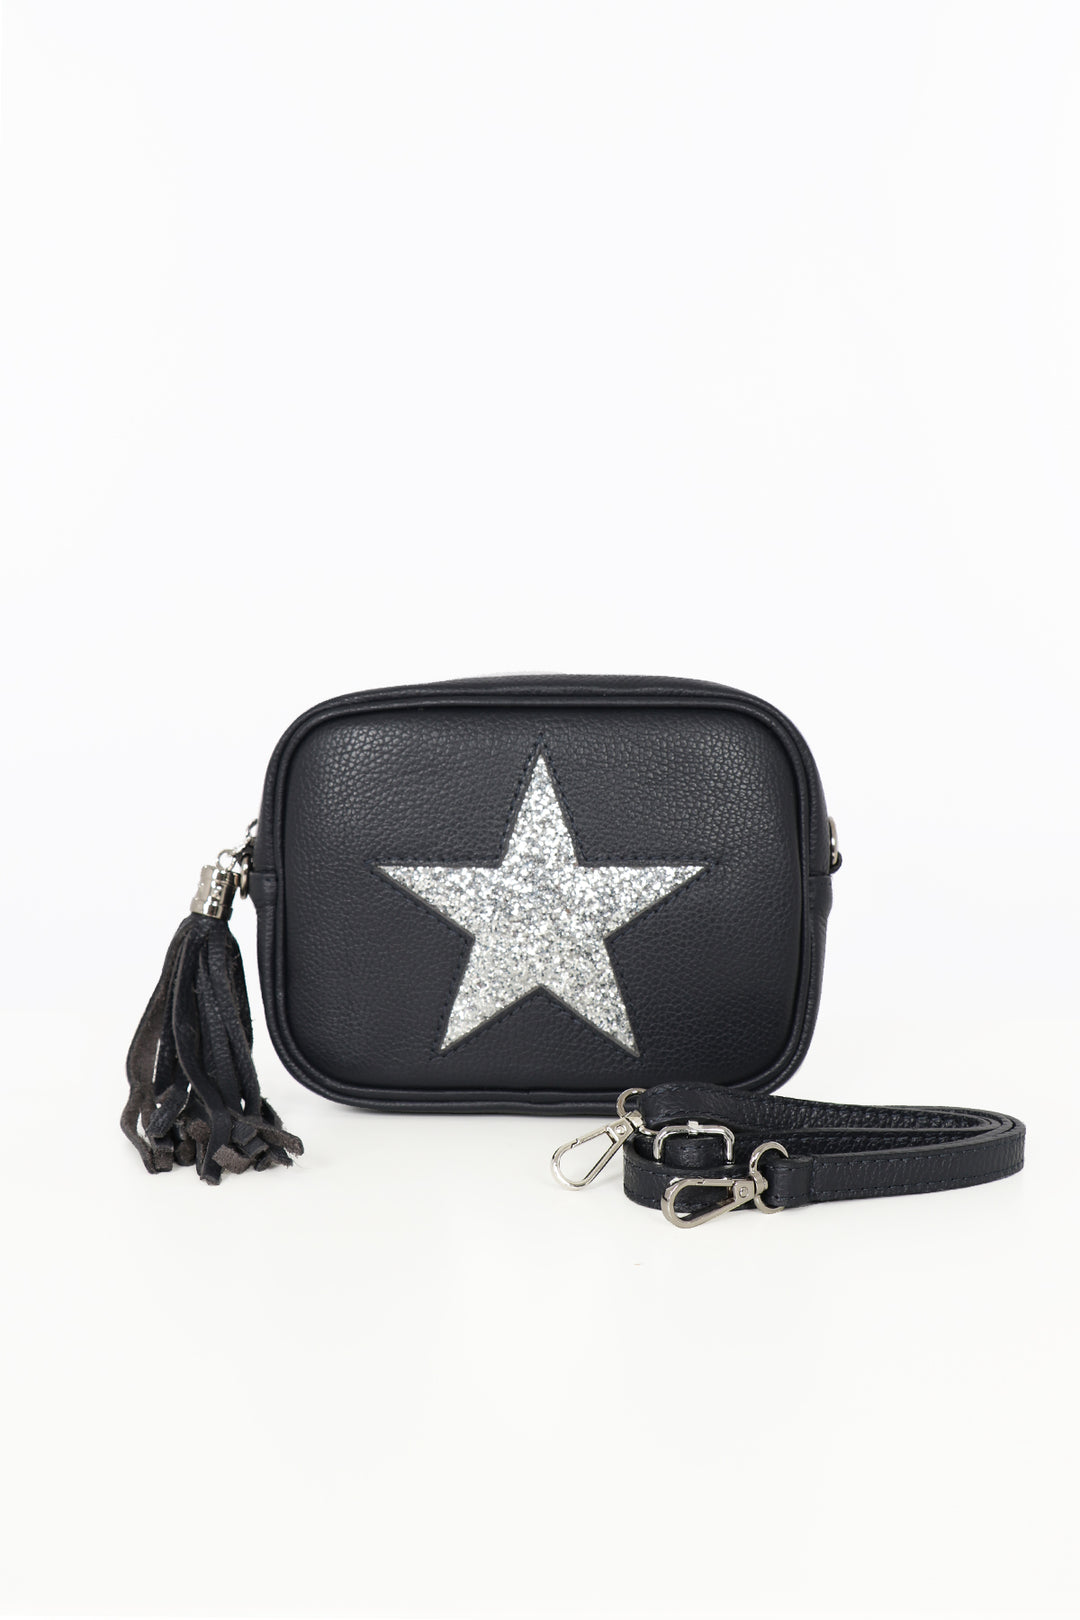 Navy Blue Sliver Glitter Genuine Italian Leather Star Detail Camera Bag With Silver Hardware